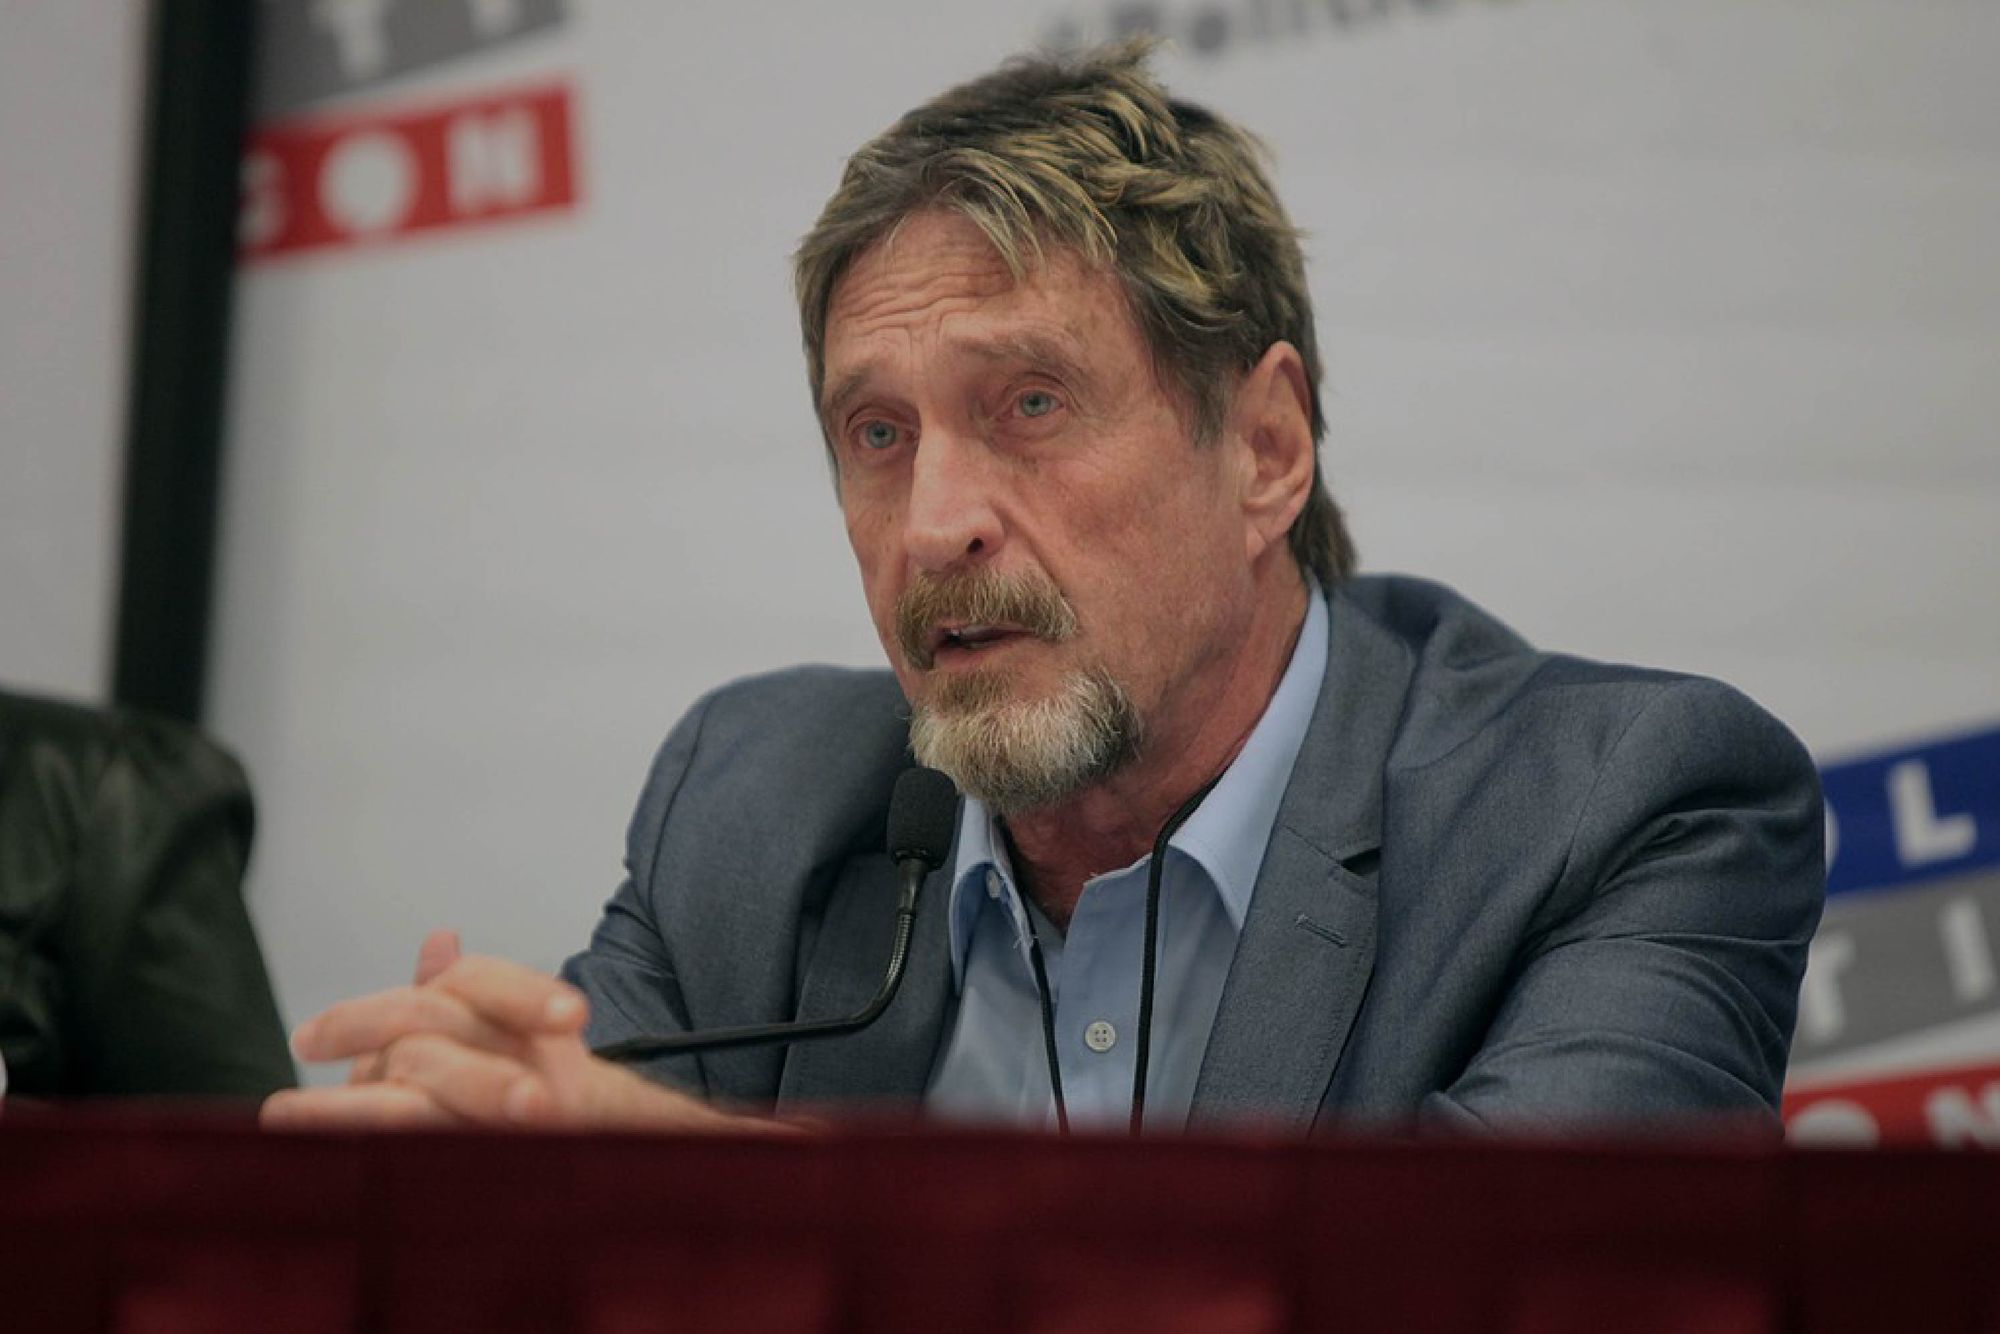 John McAfee committed suicide, the cruel fate of a famous crypto celebrity